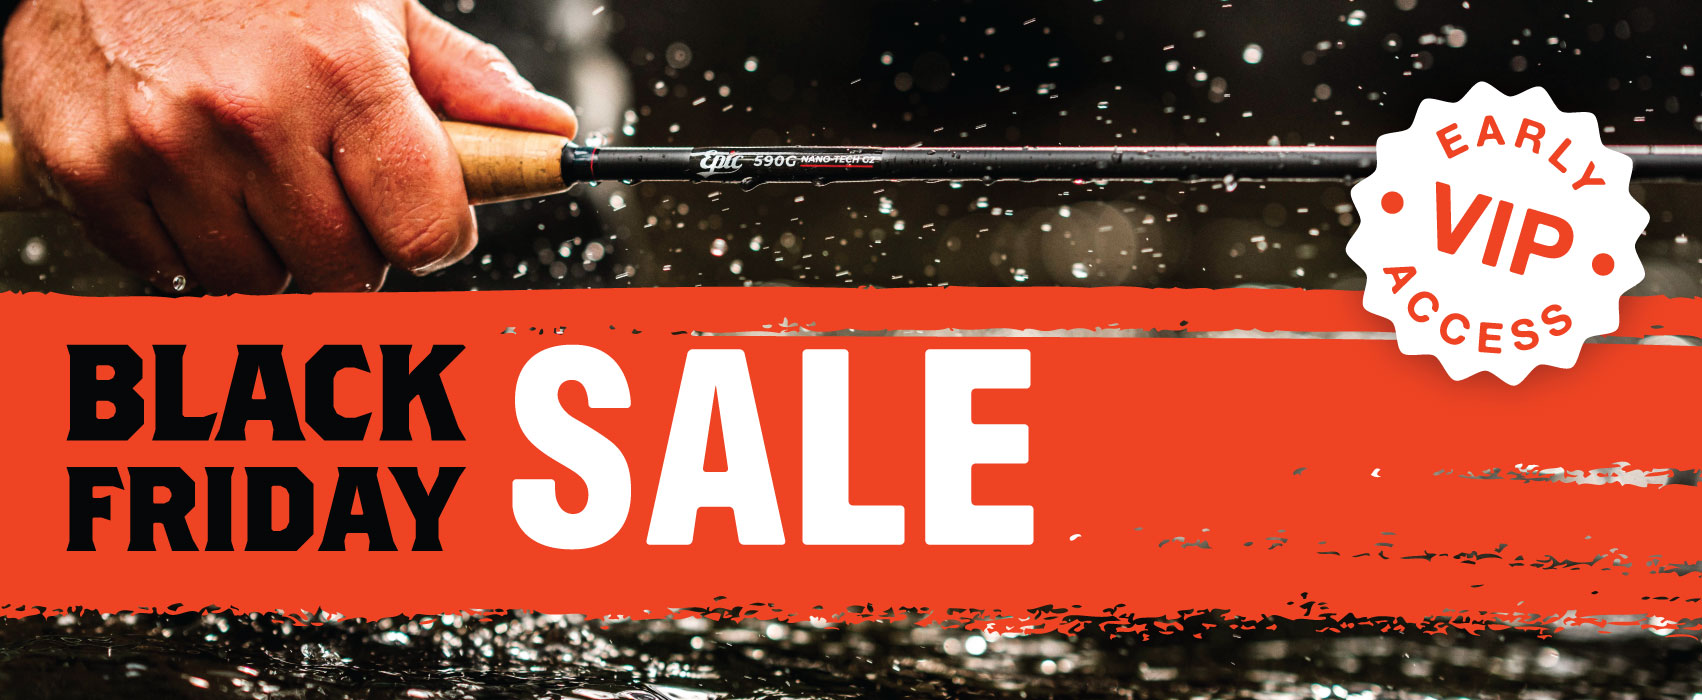 Black Friday Holiday fly fishing sale